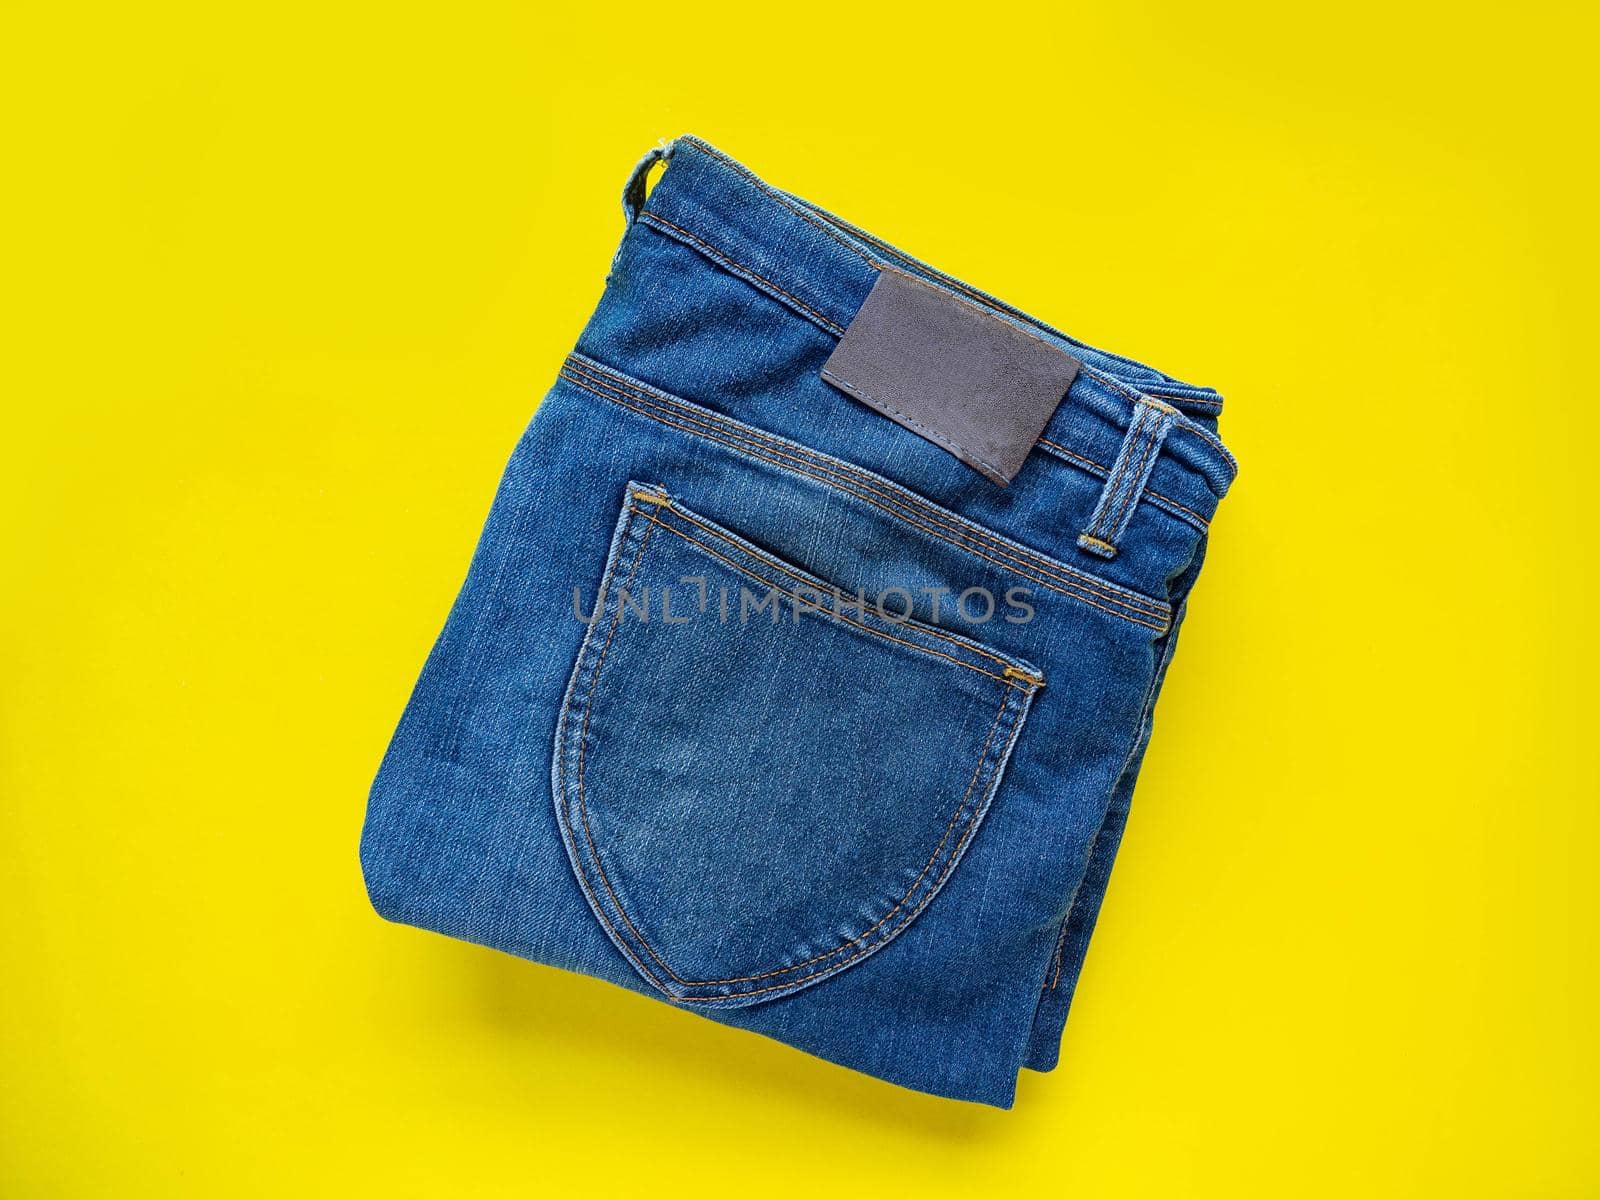 Blue pants Neatly folded See the details of the fabric Put on a yellow background